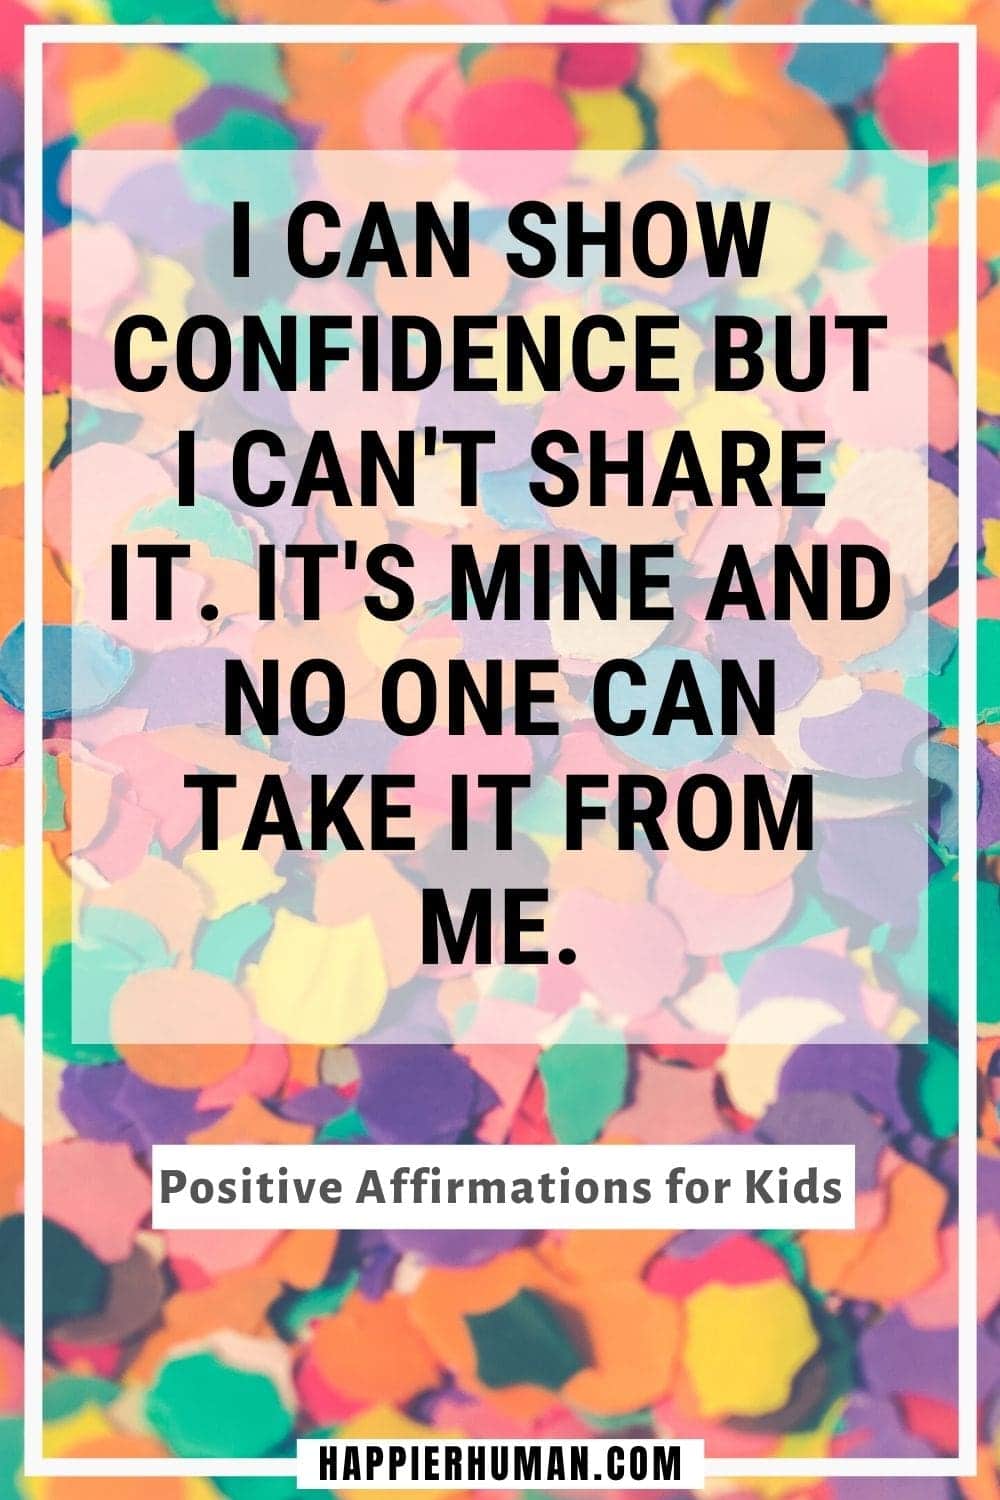 Positive Affirmations for Kids - I can show confidence but I can't share it. It's mine and no one can take it from me. | affirmation child development | 200 positive affirmations for kids | positive affirmations for parents